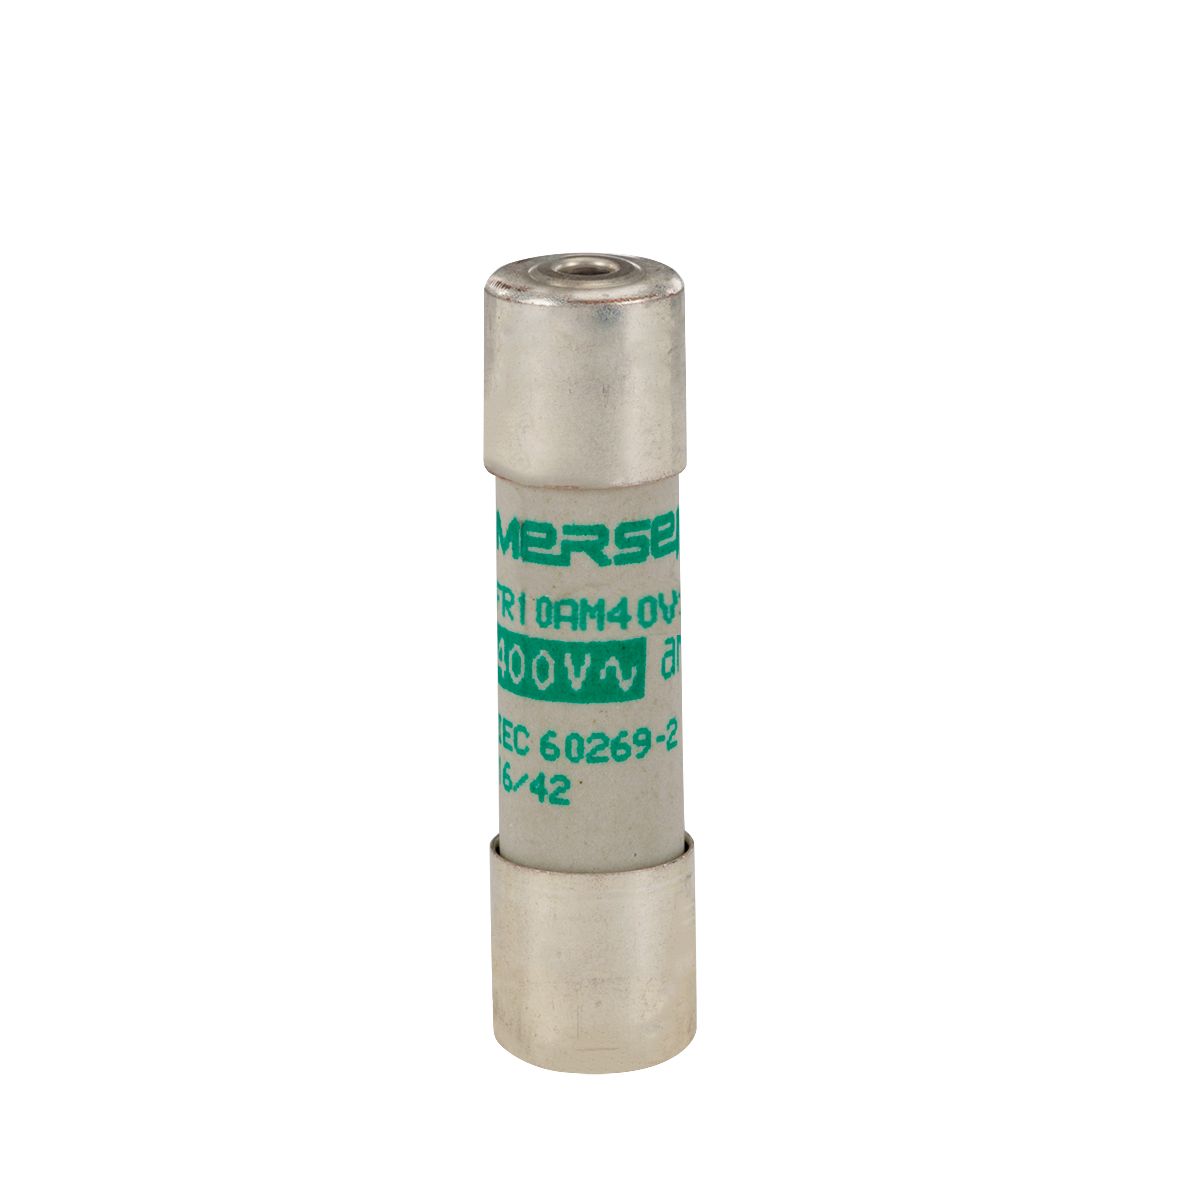 C084757 - Cylindrical fuse-link aM 400VAC 10.3x38, 16A with striker